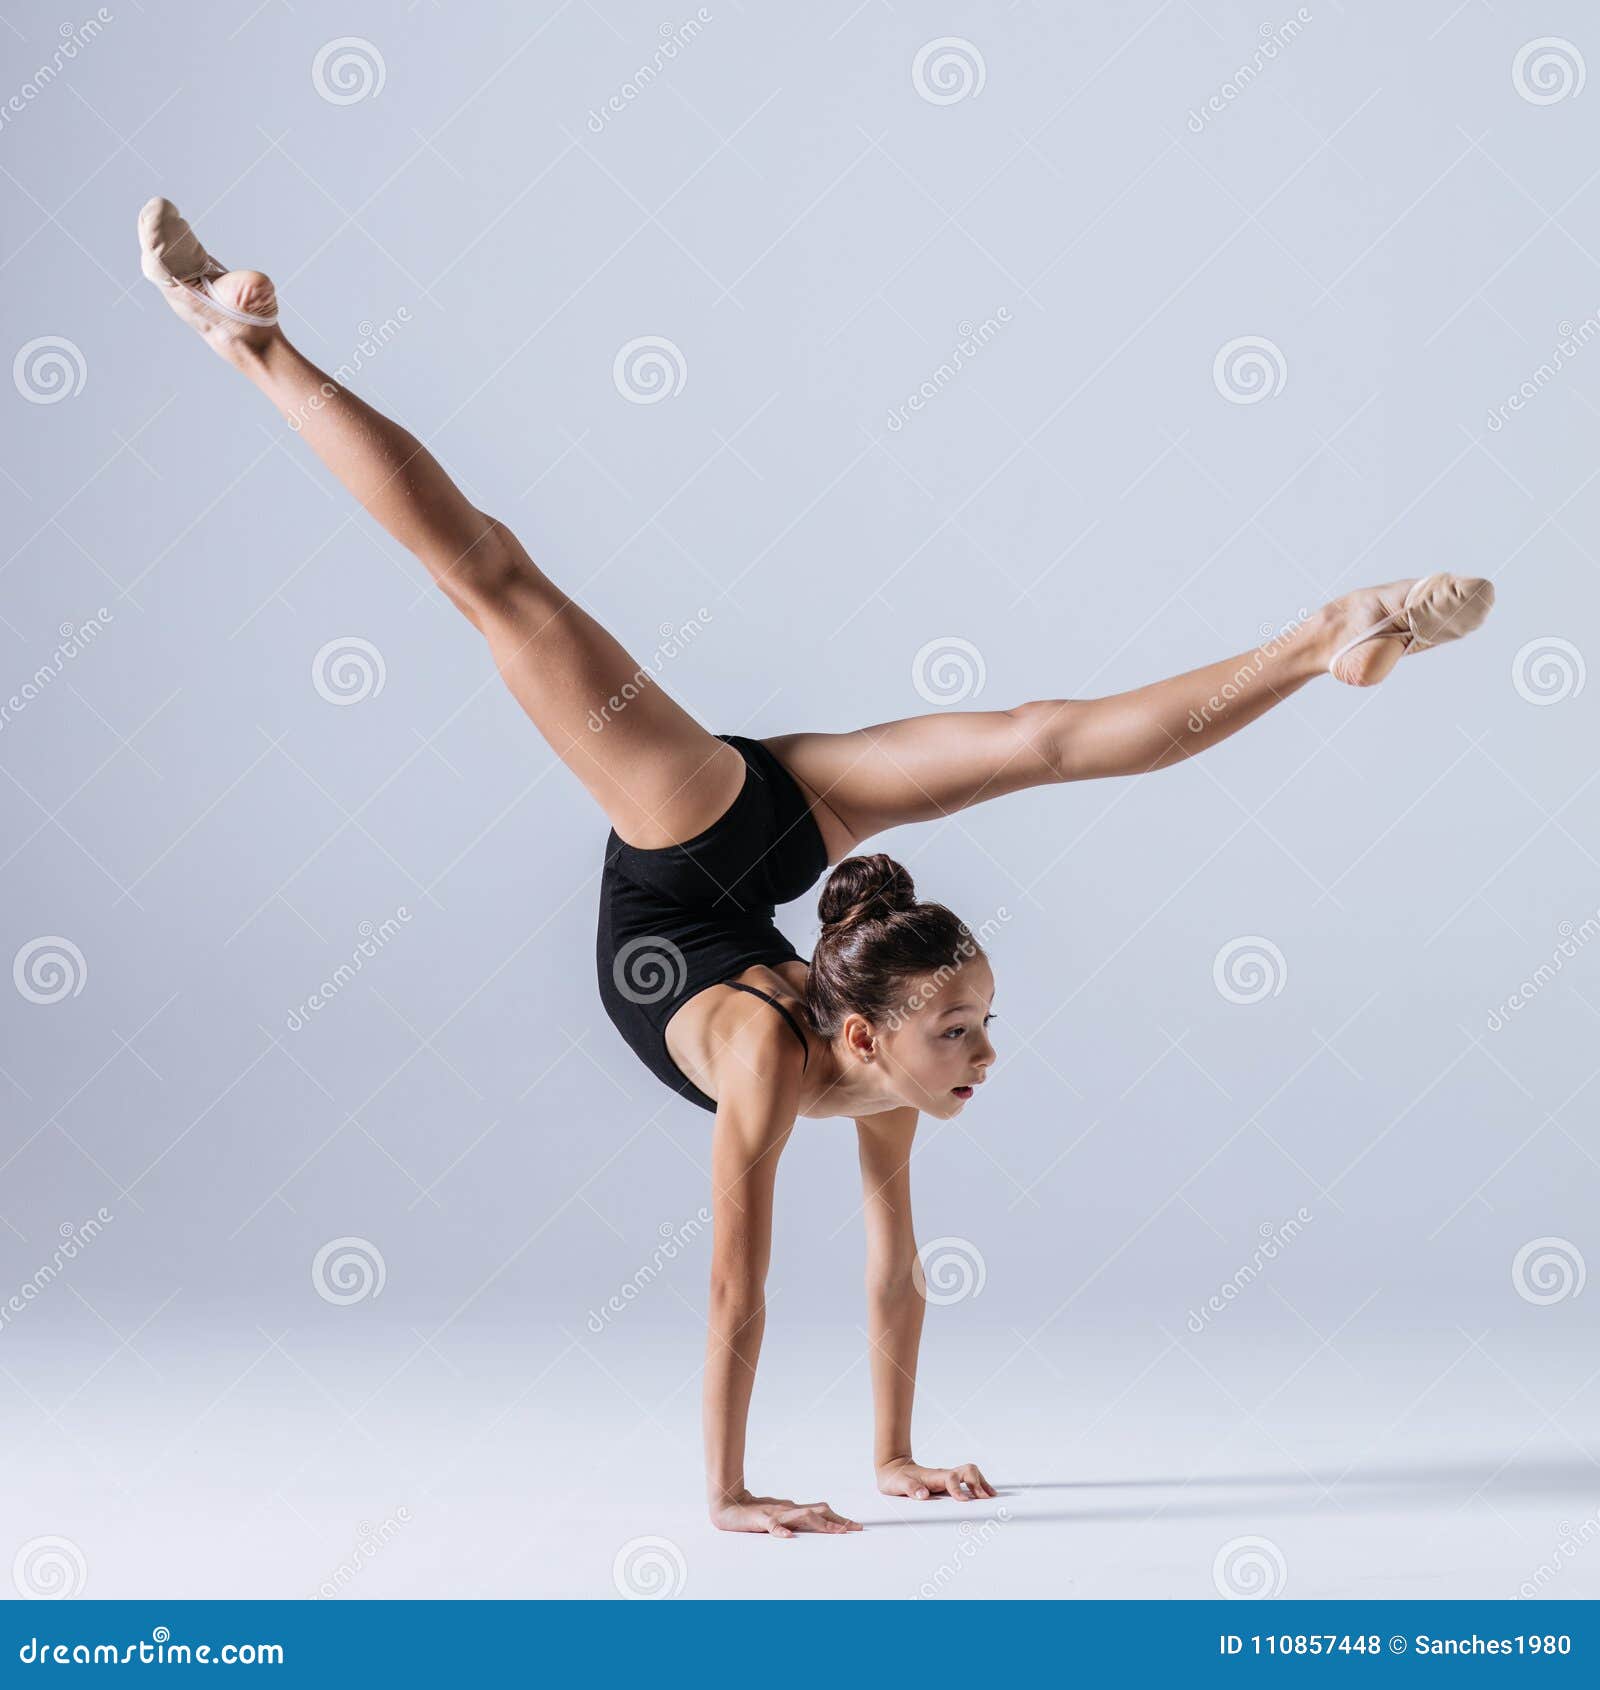 Young Gymnast Girl Stretching and Training Stock Photo - Image of